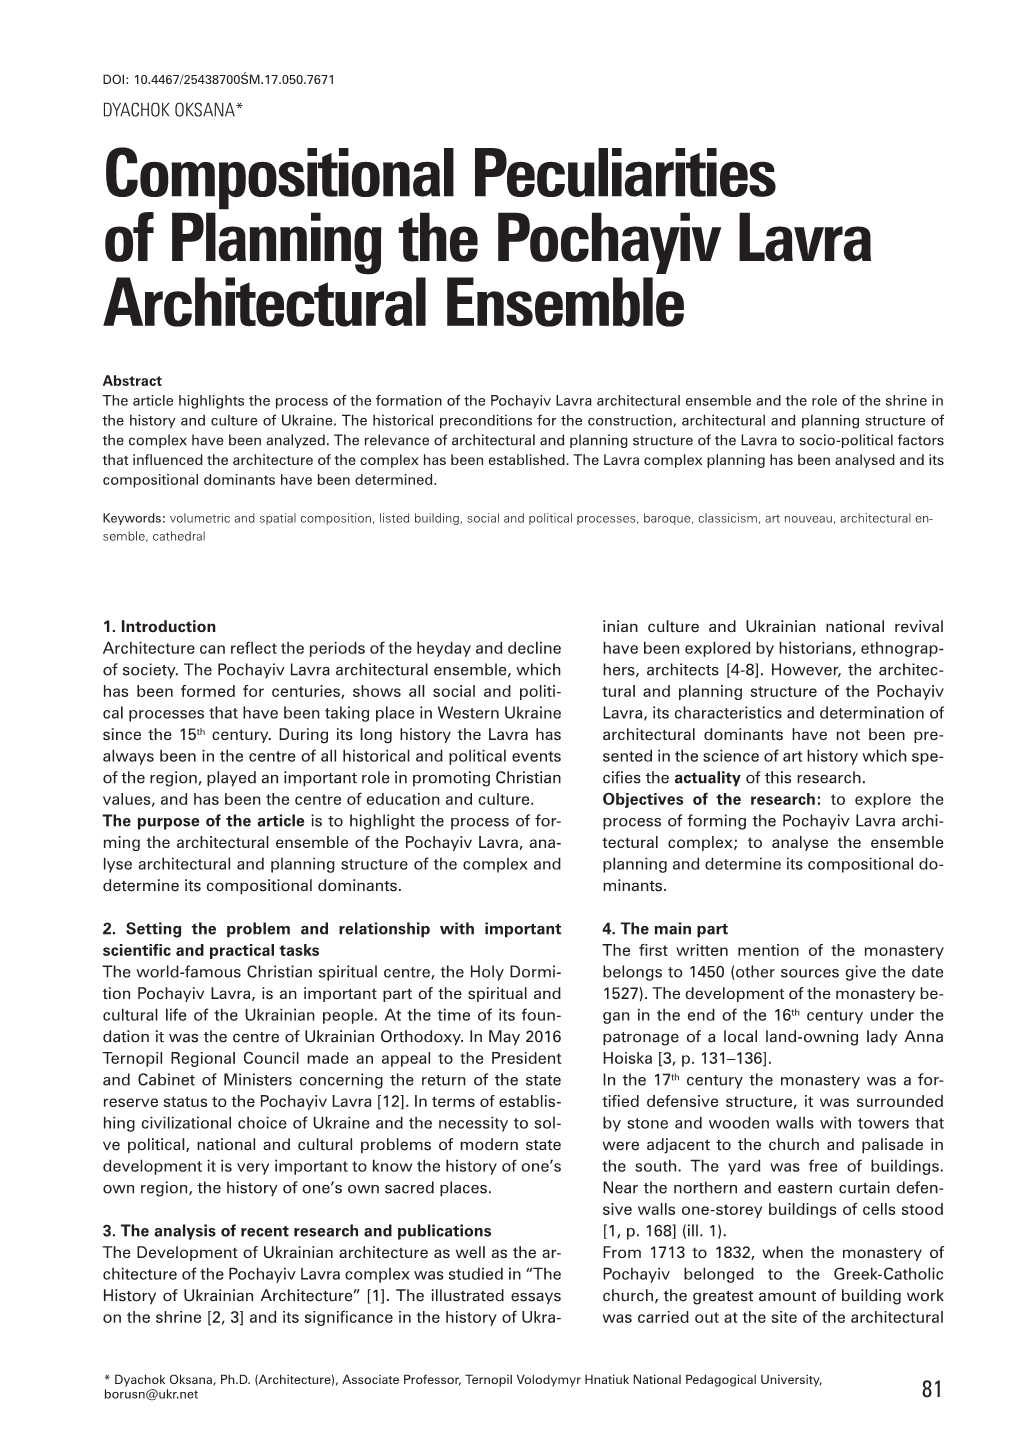 Compositional Peculiarities of Planning the Pochayiv Lavra Architectural Ensemble